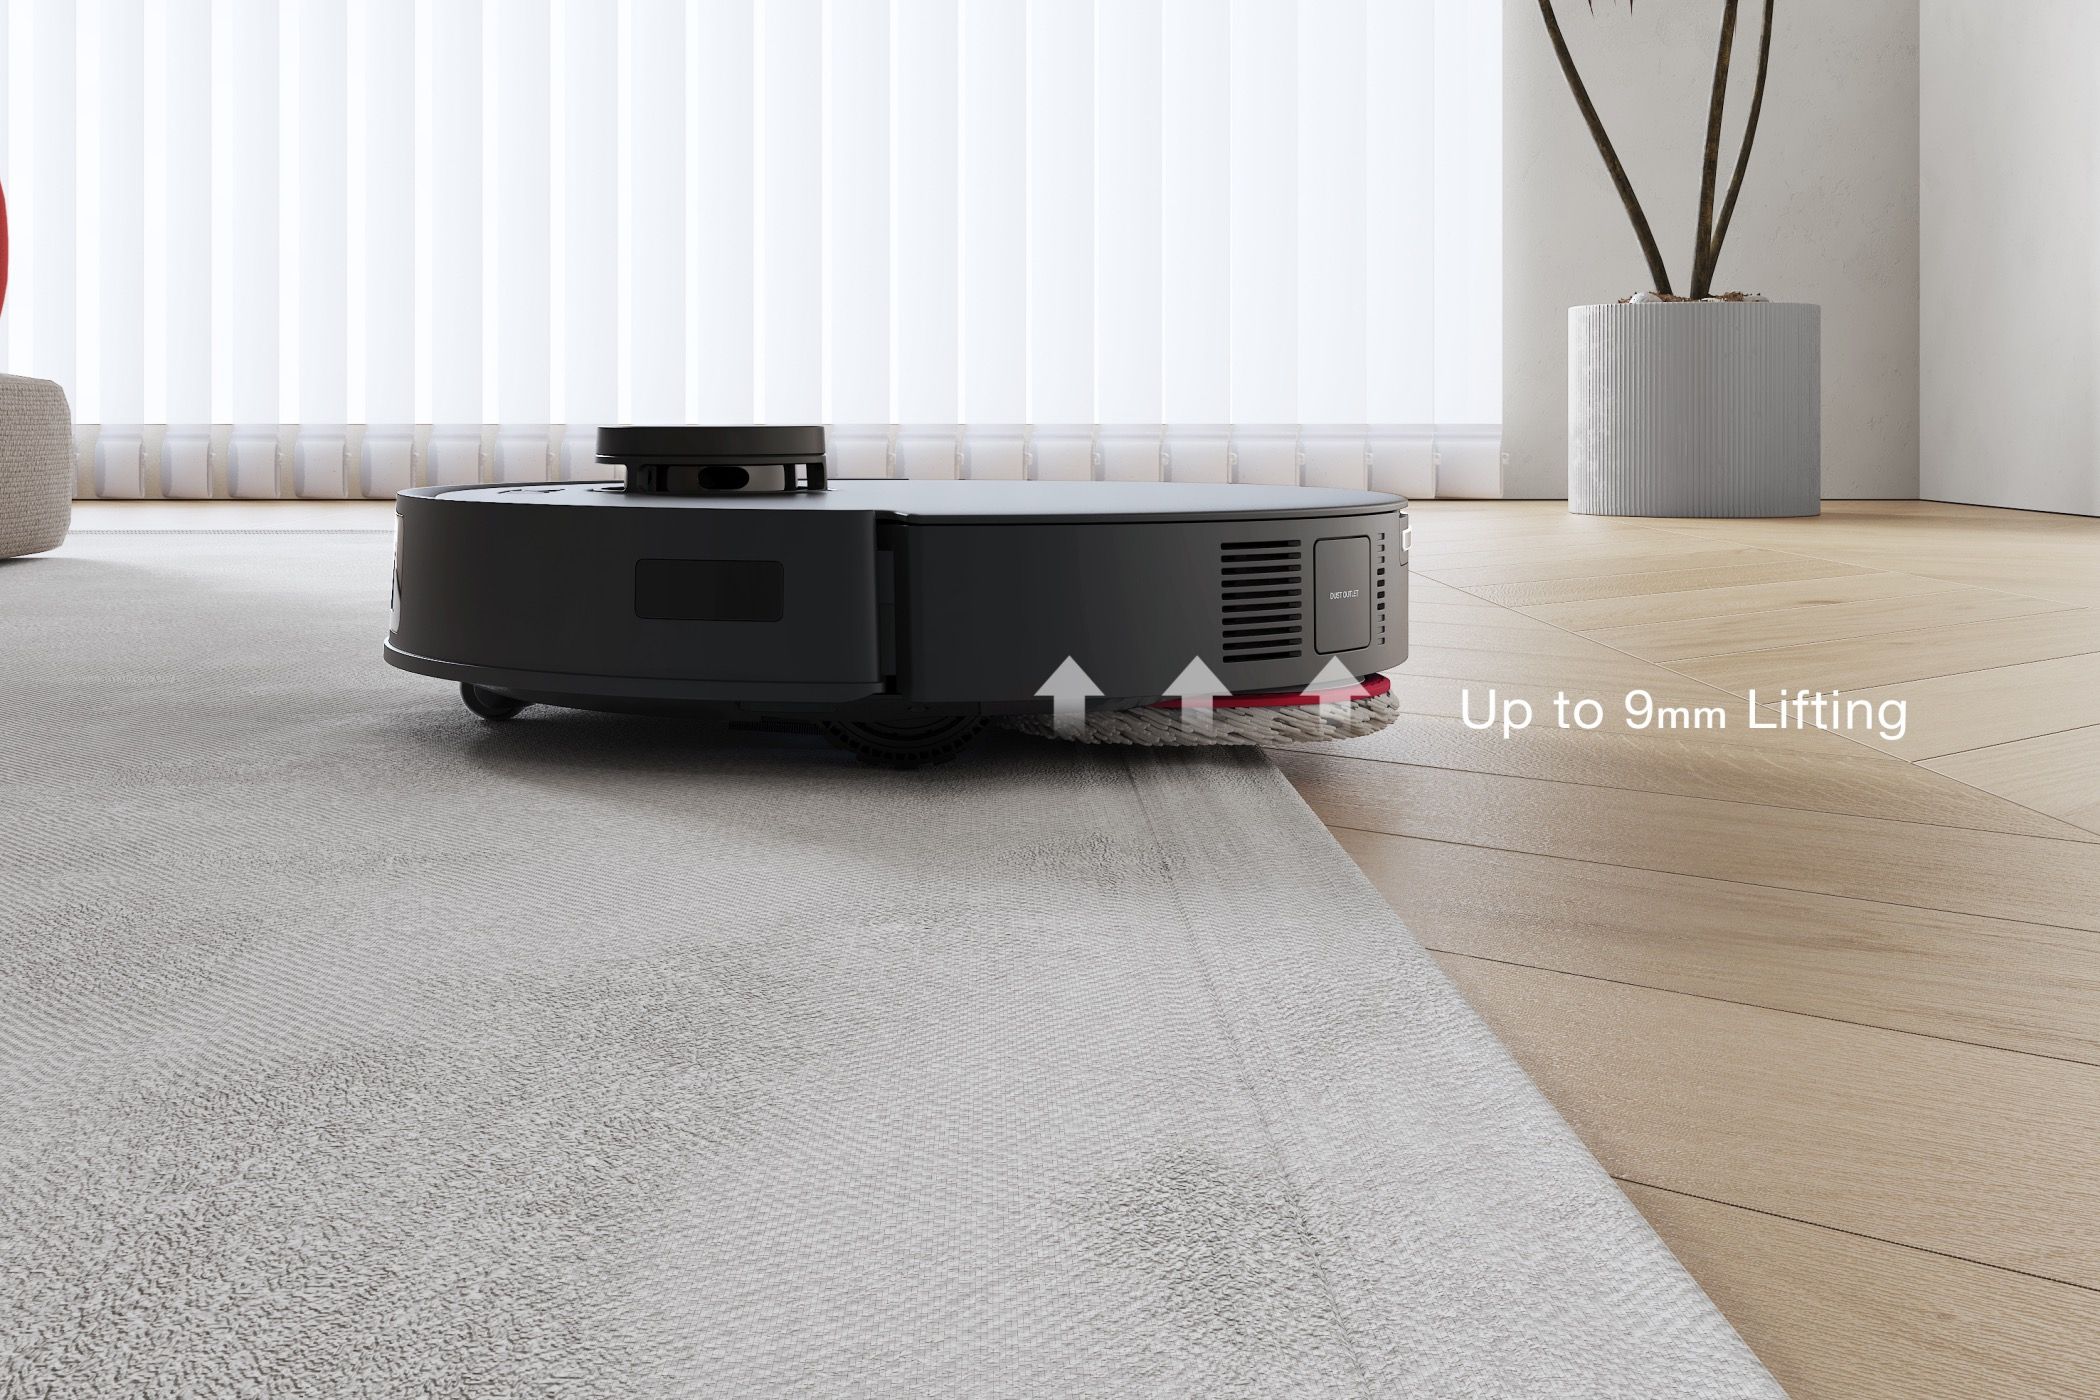 The YEEDI M12 Pro+ lifting the mop while on the carpet.